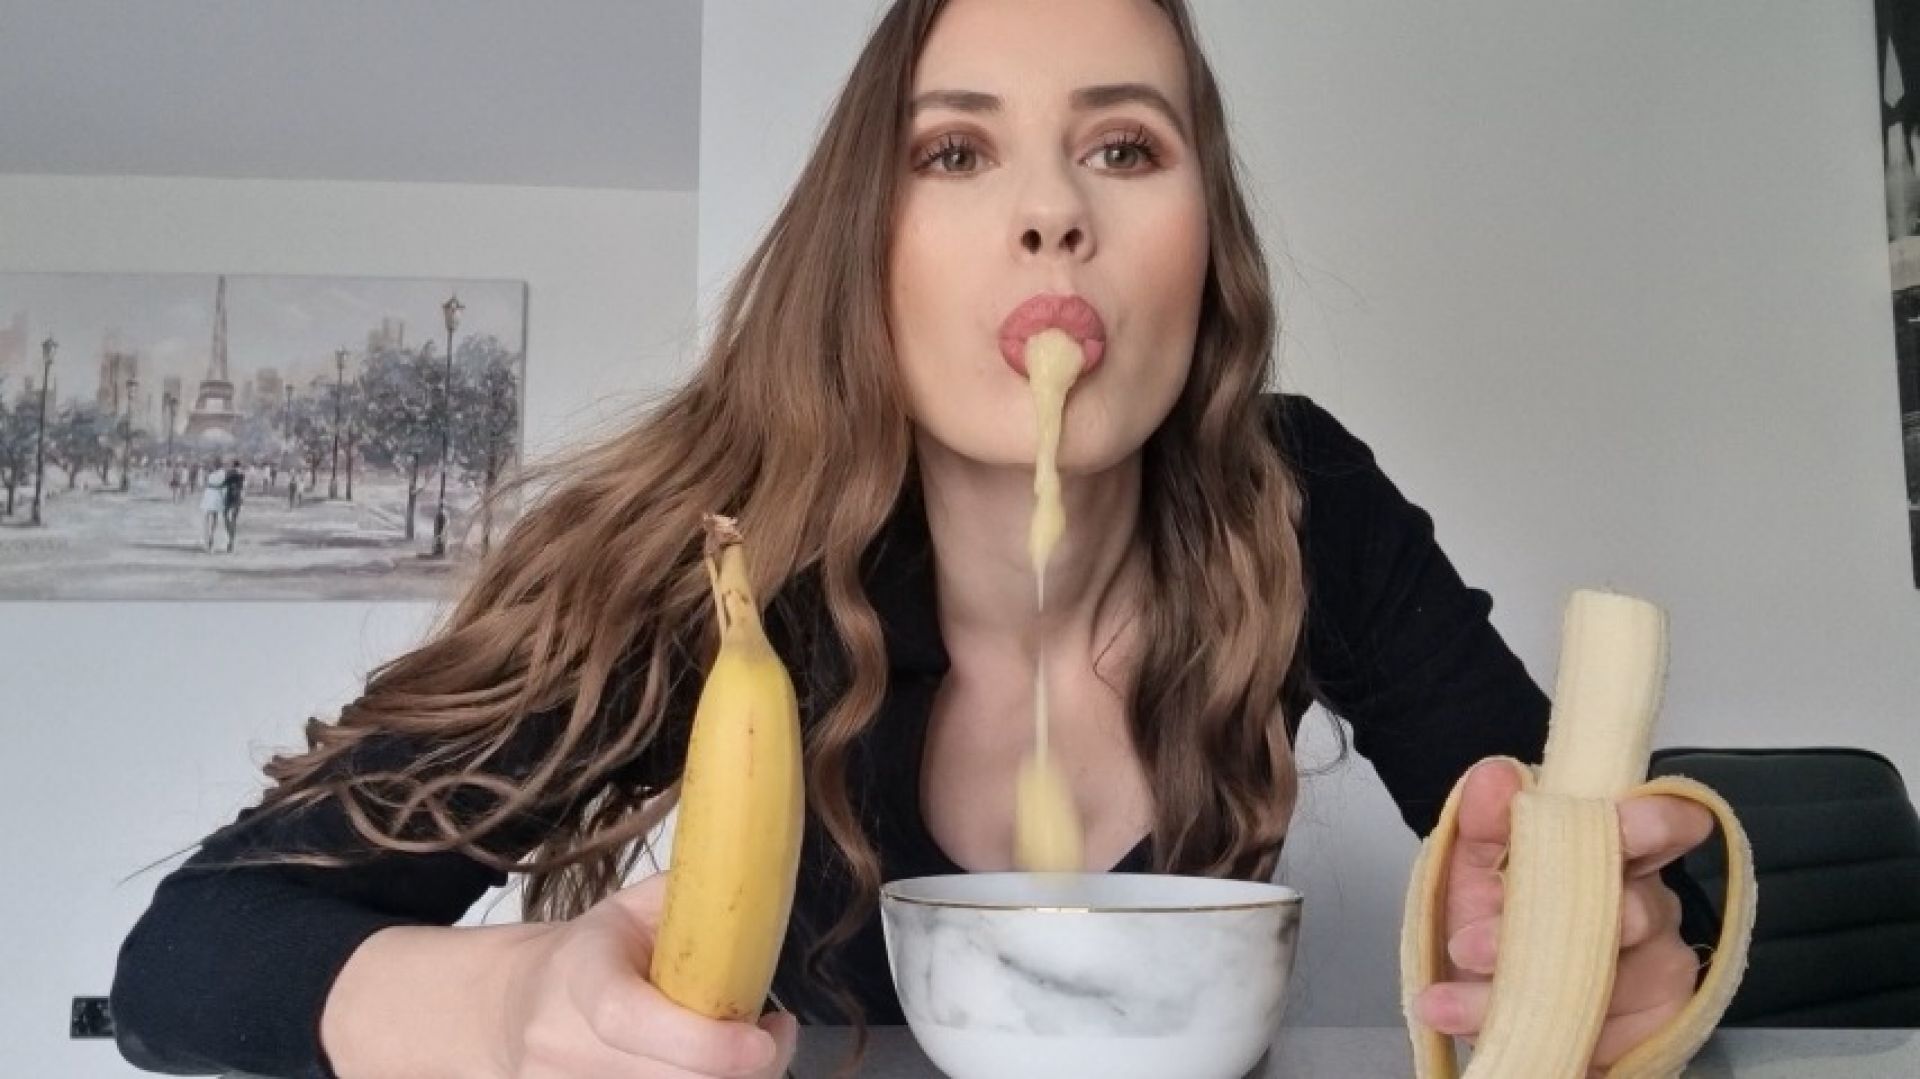 leaked 2 Spitty Bananas For You thumbnail